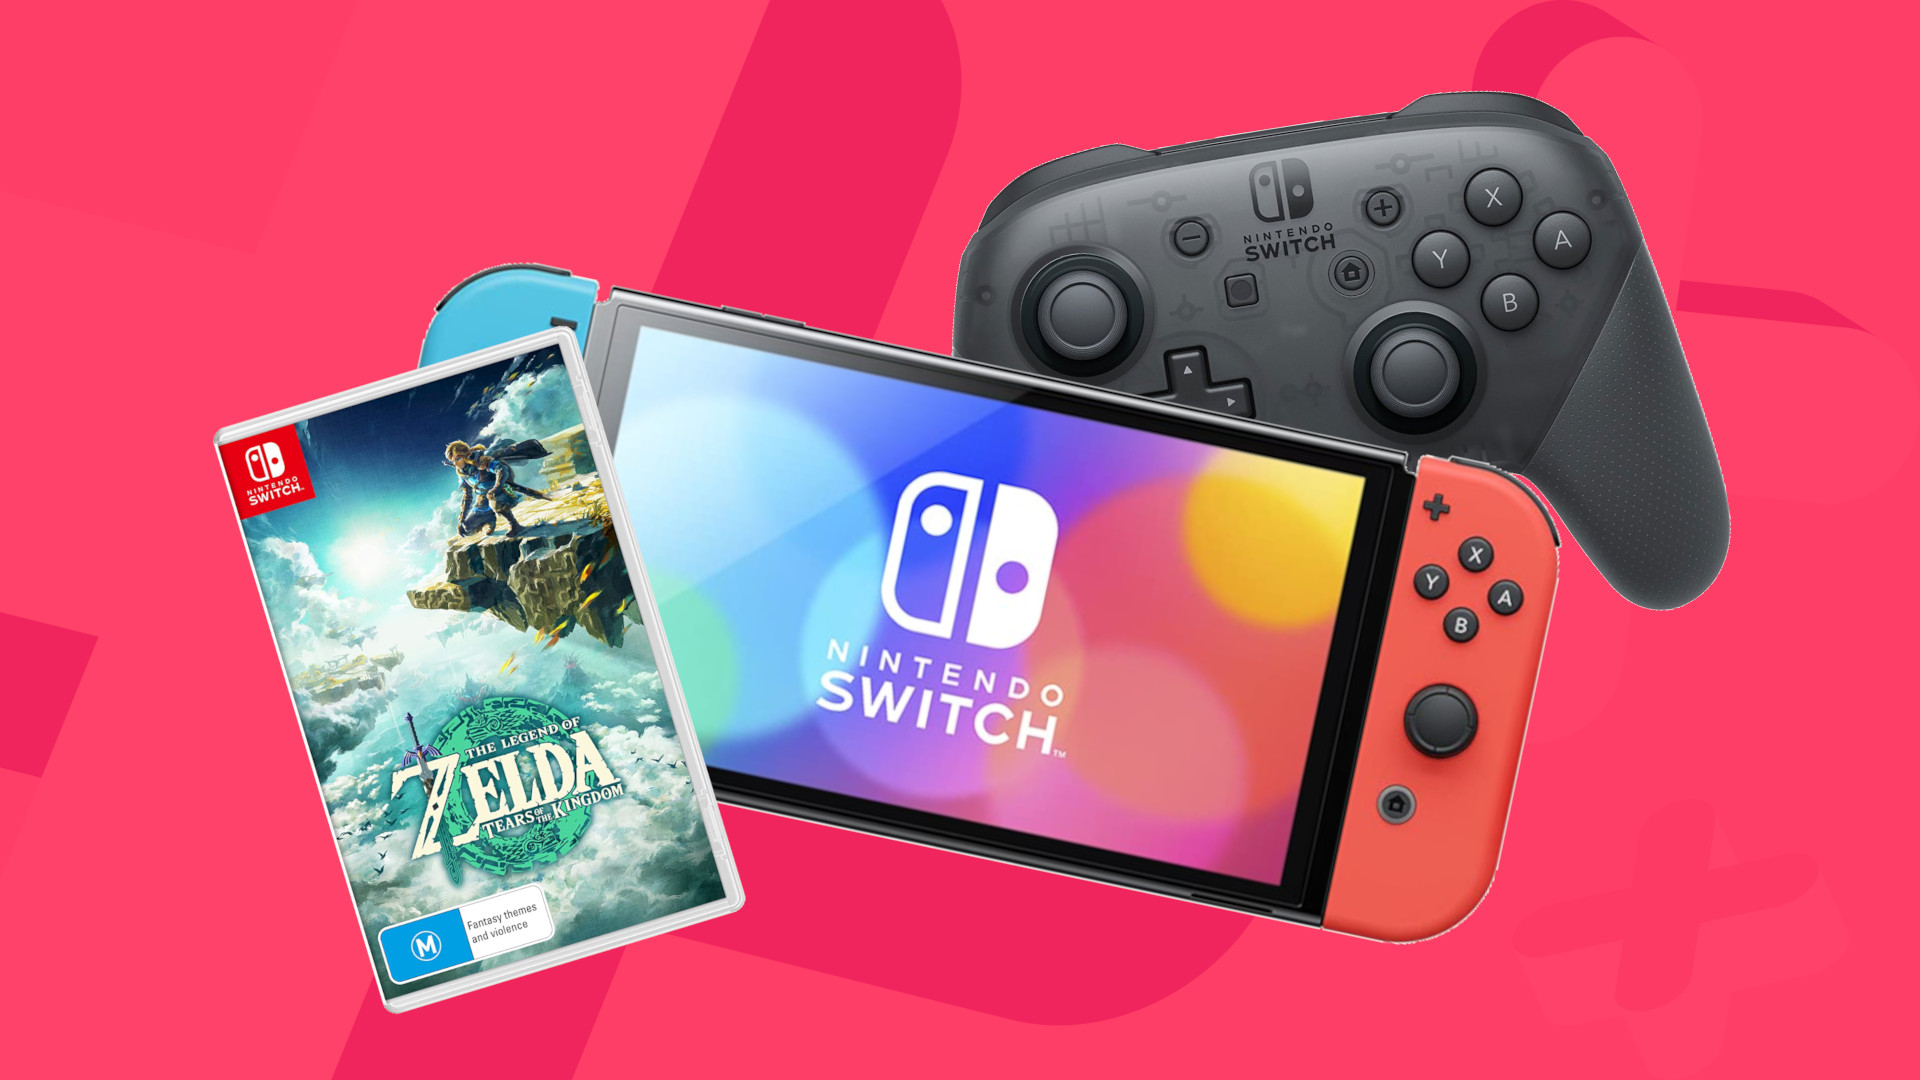 Official Nintendo Switch Black Friday game deals go live today at up to 50%  off!